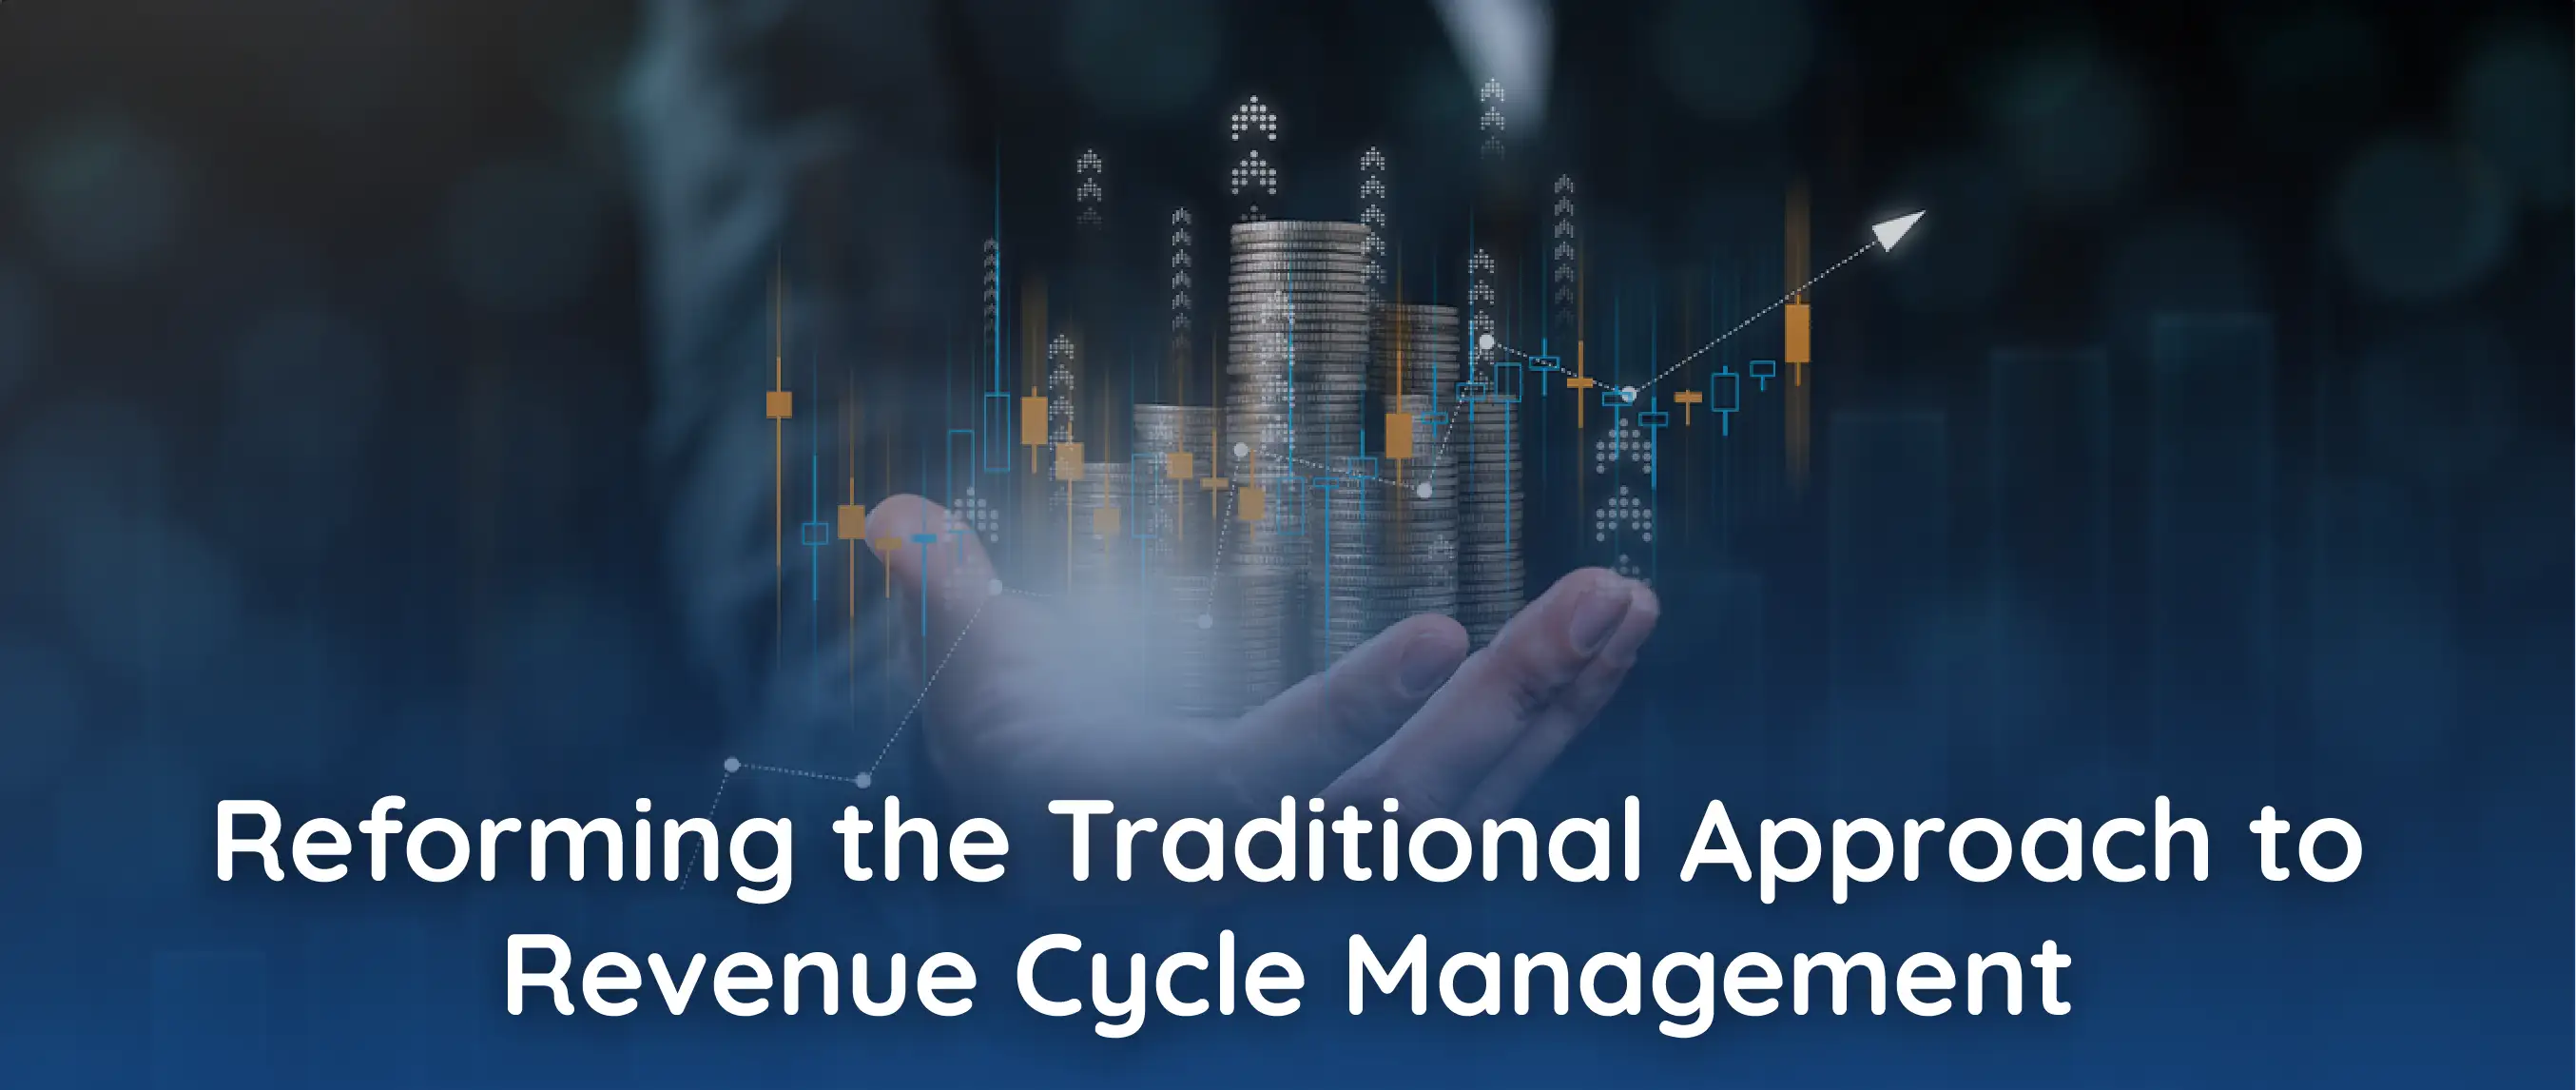 Reforming the Traditional Approach to Revenue Cycle Management